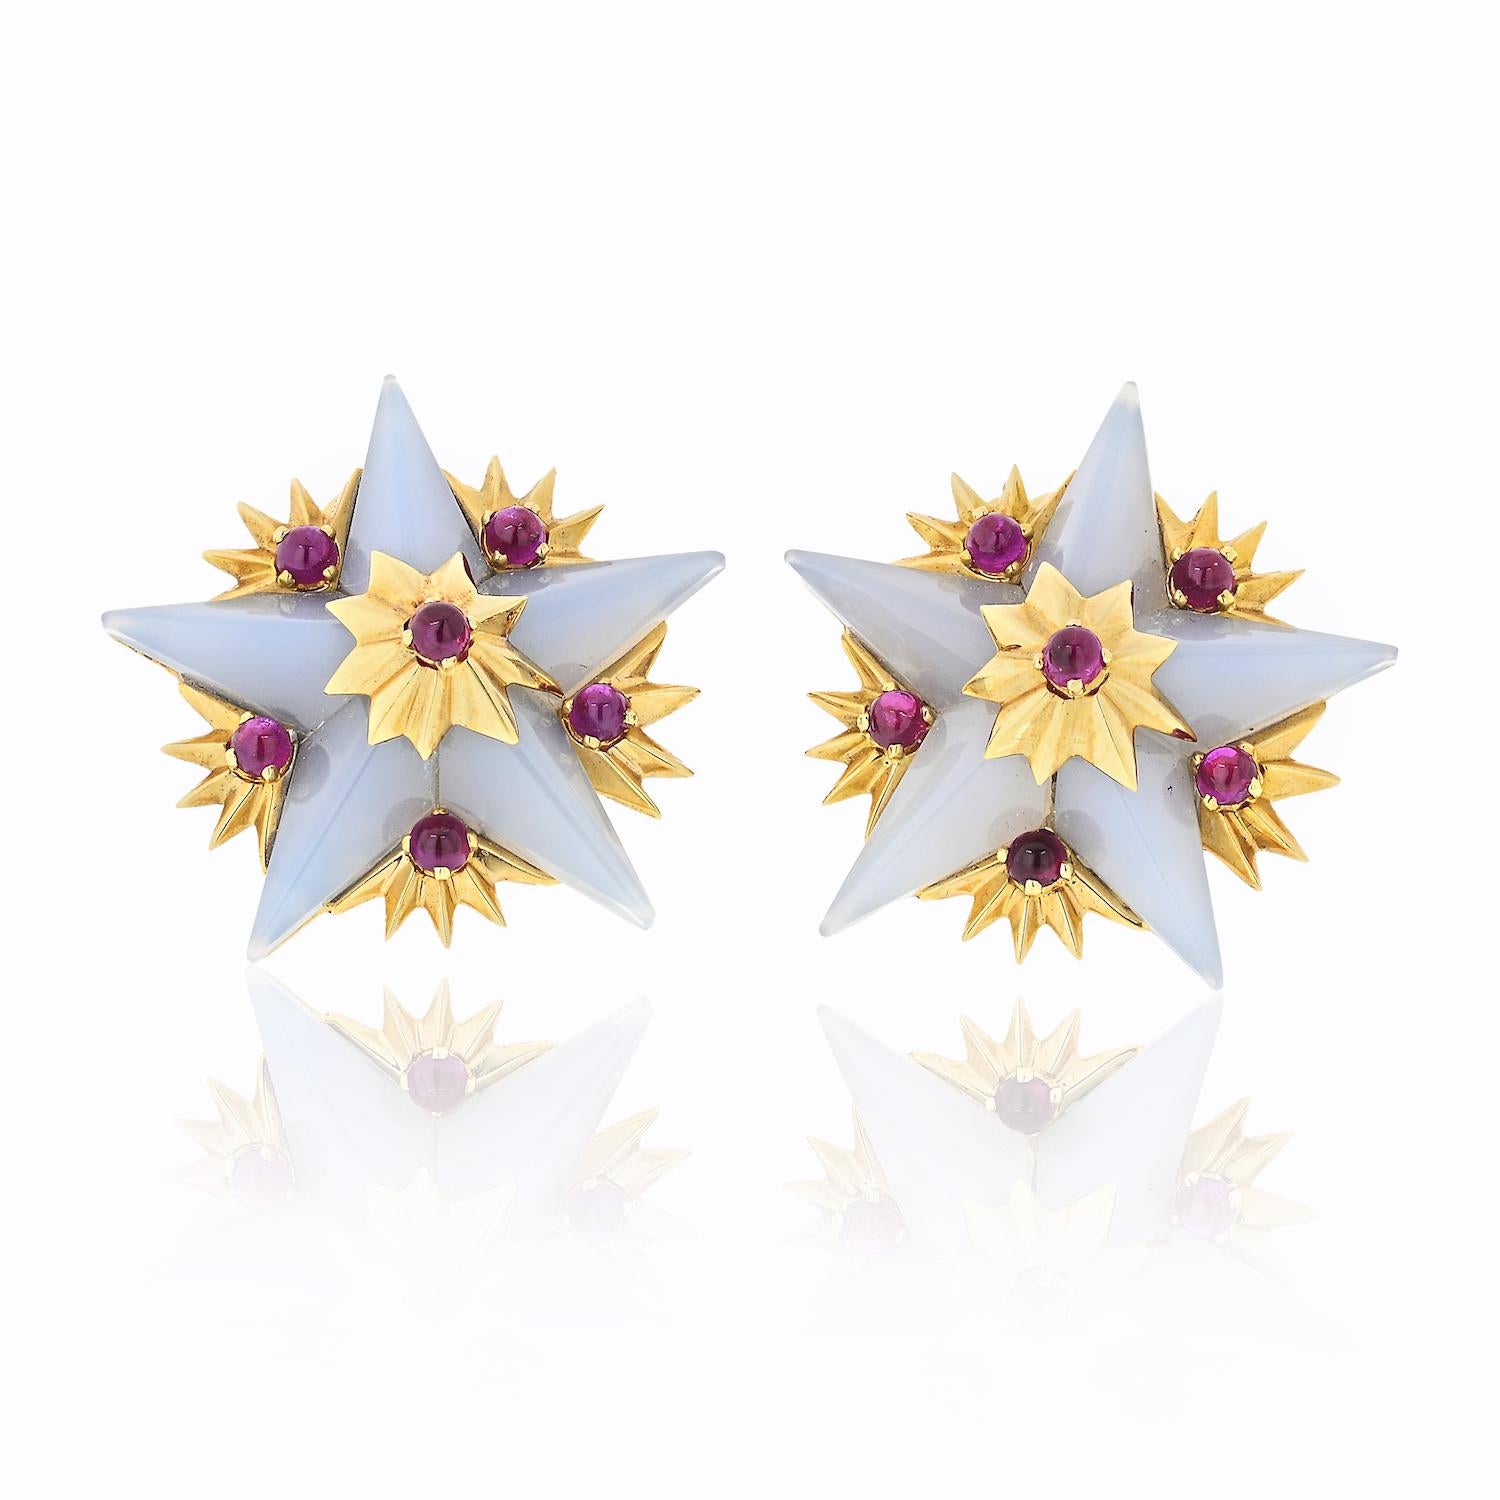 A Pair of Tiffany & Co Schlumberger Gold, Chalcedony and Ruby Earrings. Designed as chalcedony stars with multiple 18K yellow gold bursts featuring round cabochon rubies; earring backs are clip-on; comes with a suede Tiffany box; each earring